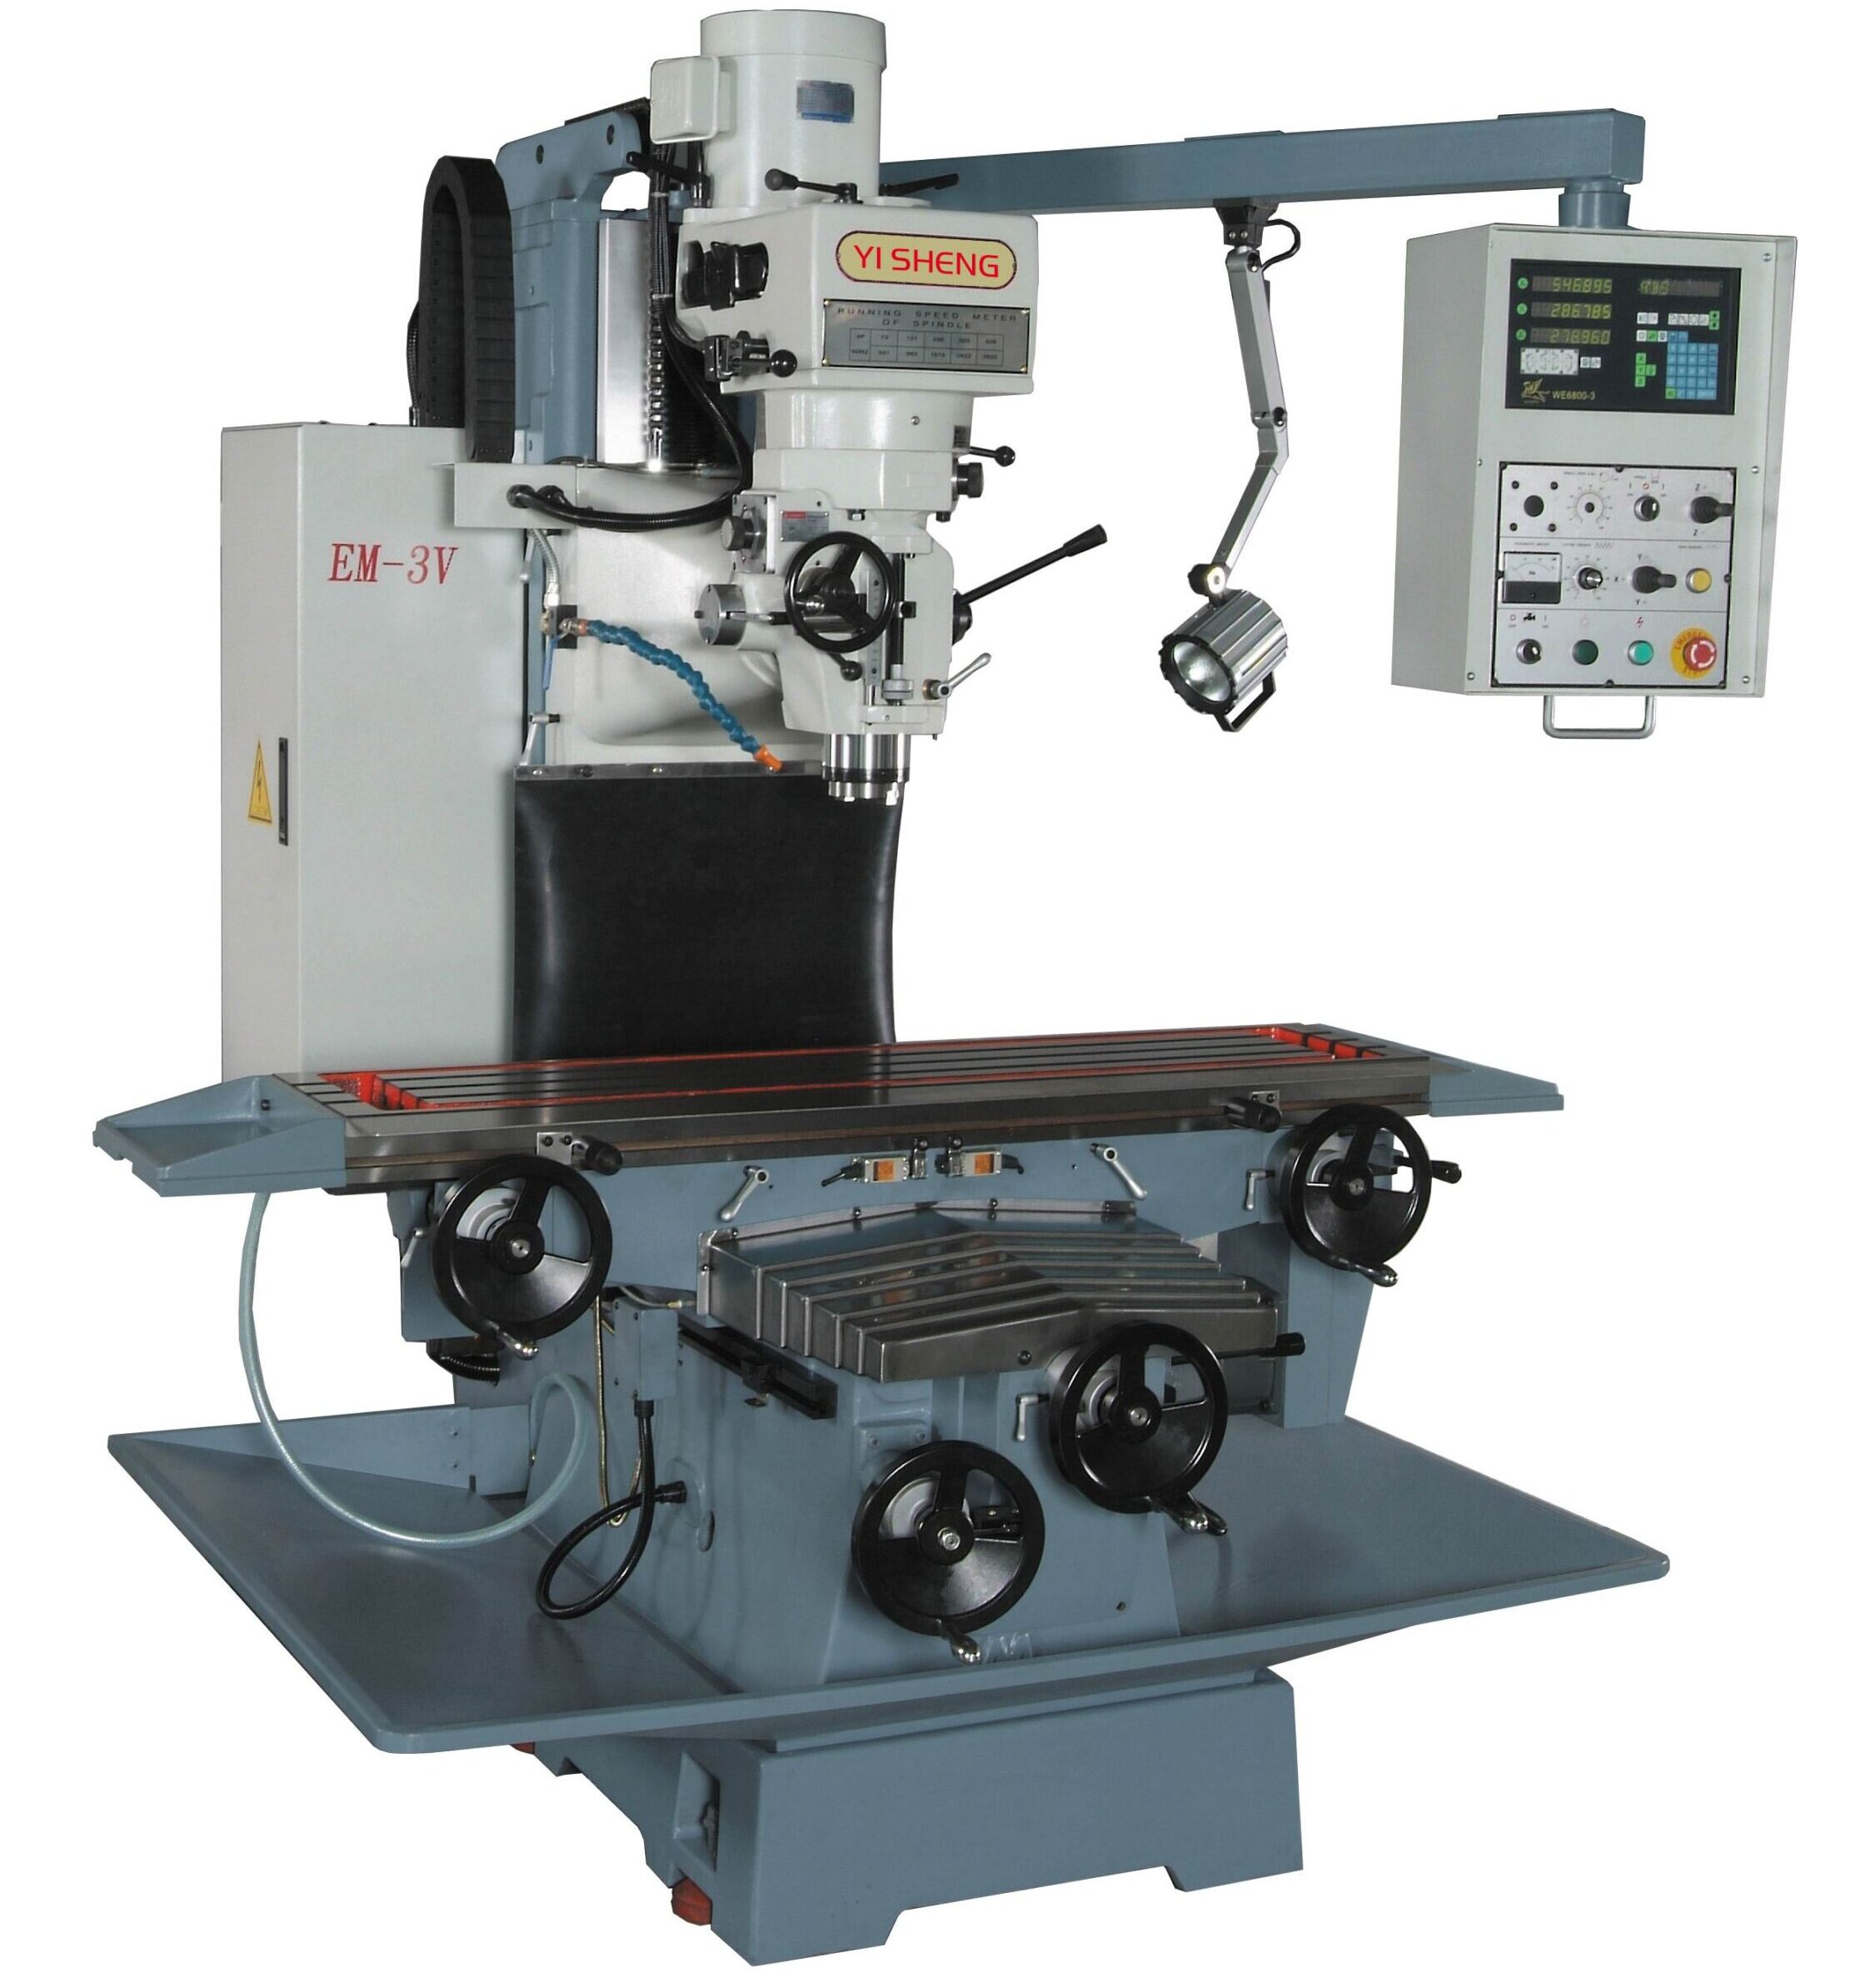 Introduction to Different Types of Milling Machines